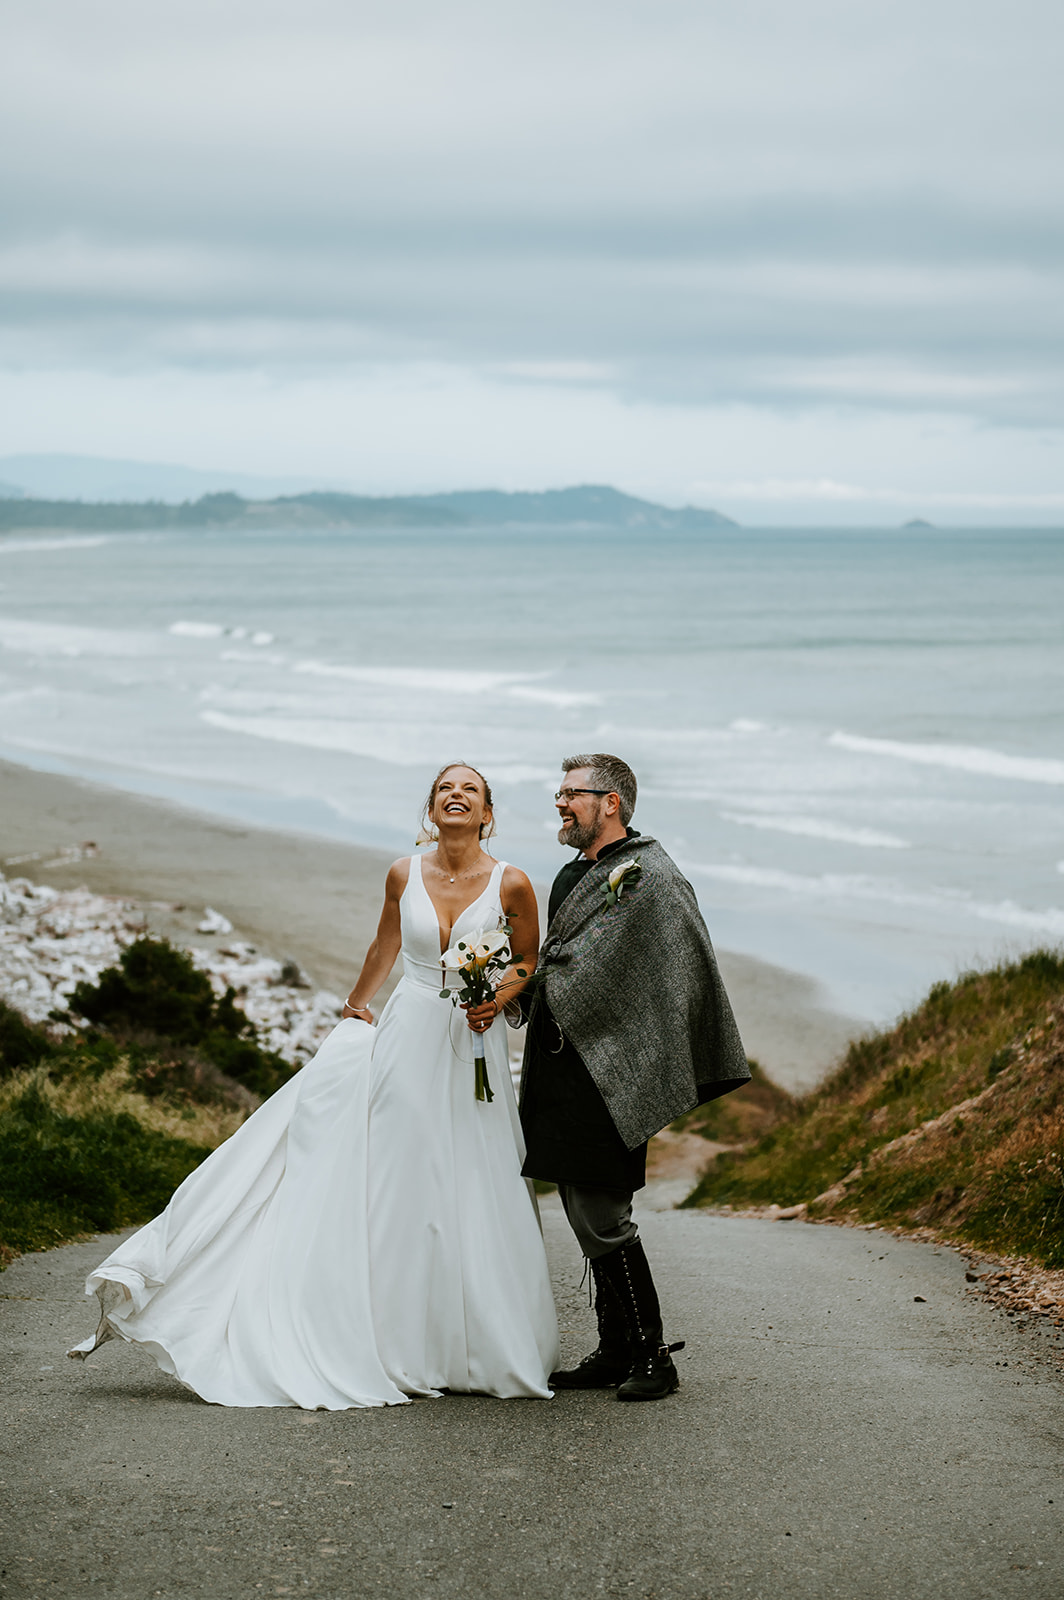 Bride and groom smiling together while the bride twirls her dress overlooking the Oregon coast